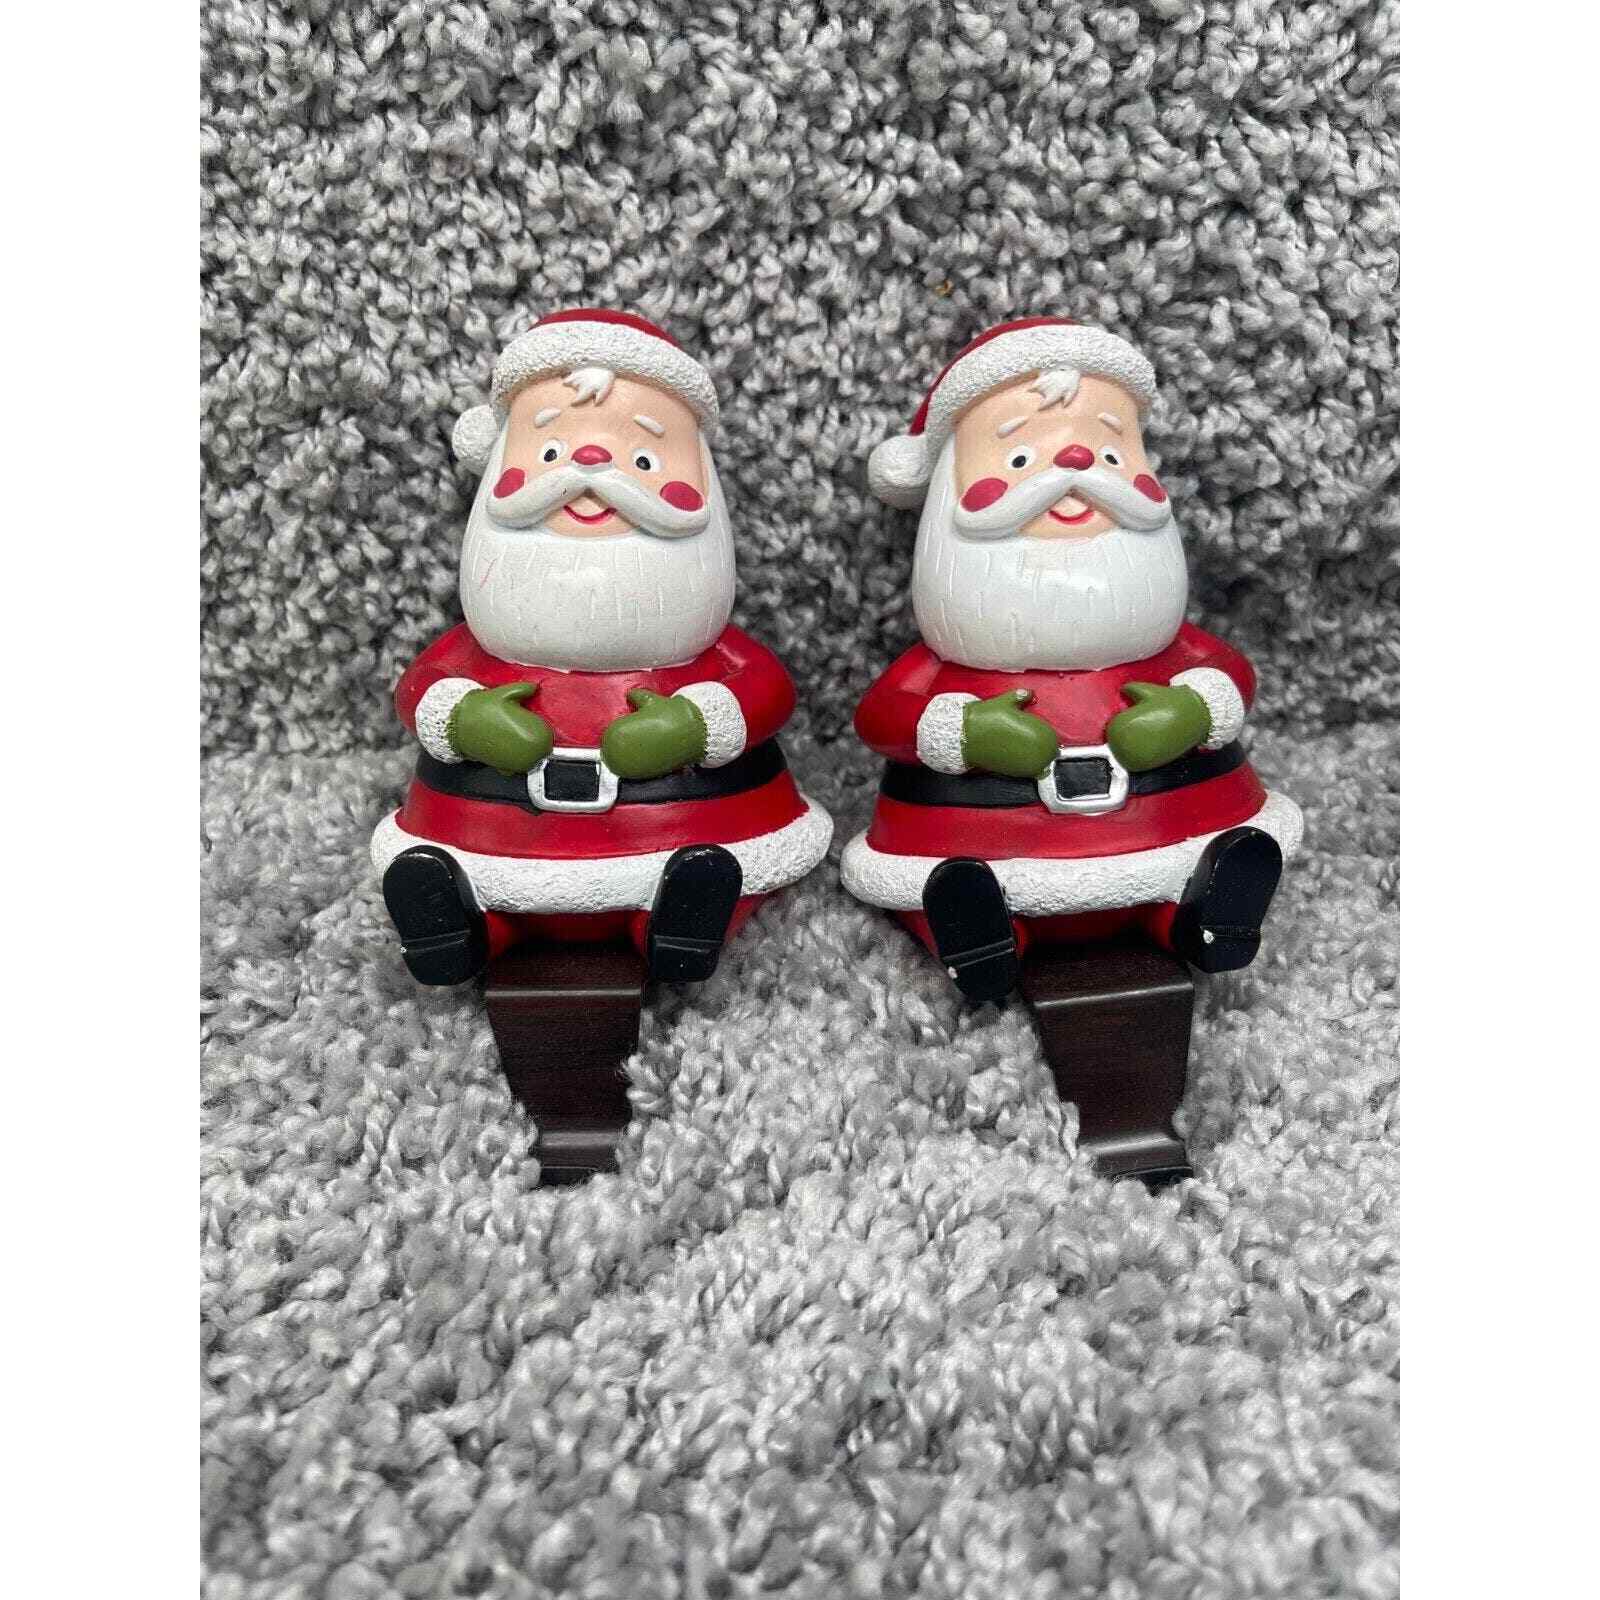 Lot Of 2 Christmas Holiday Santa Claus Shelf Sitter With Hook Figurine